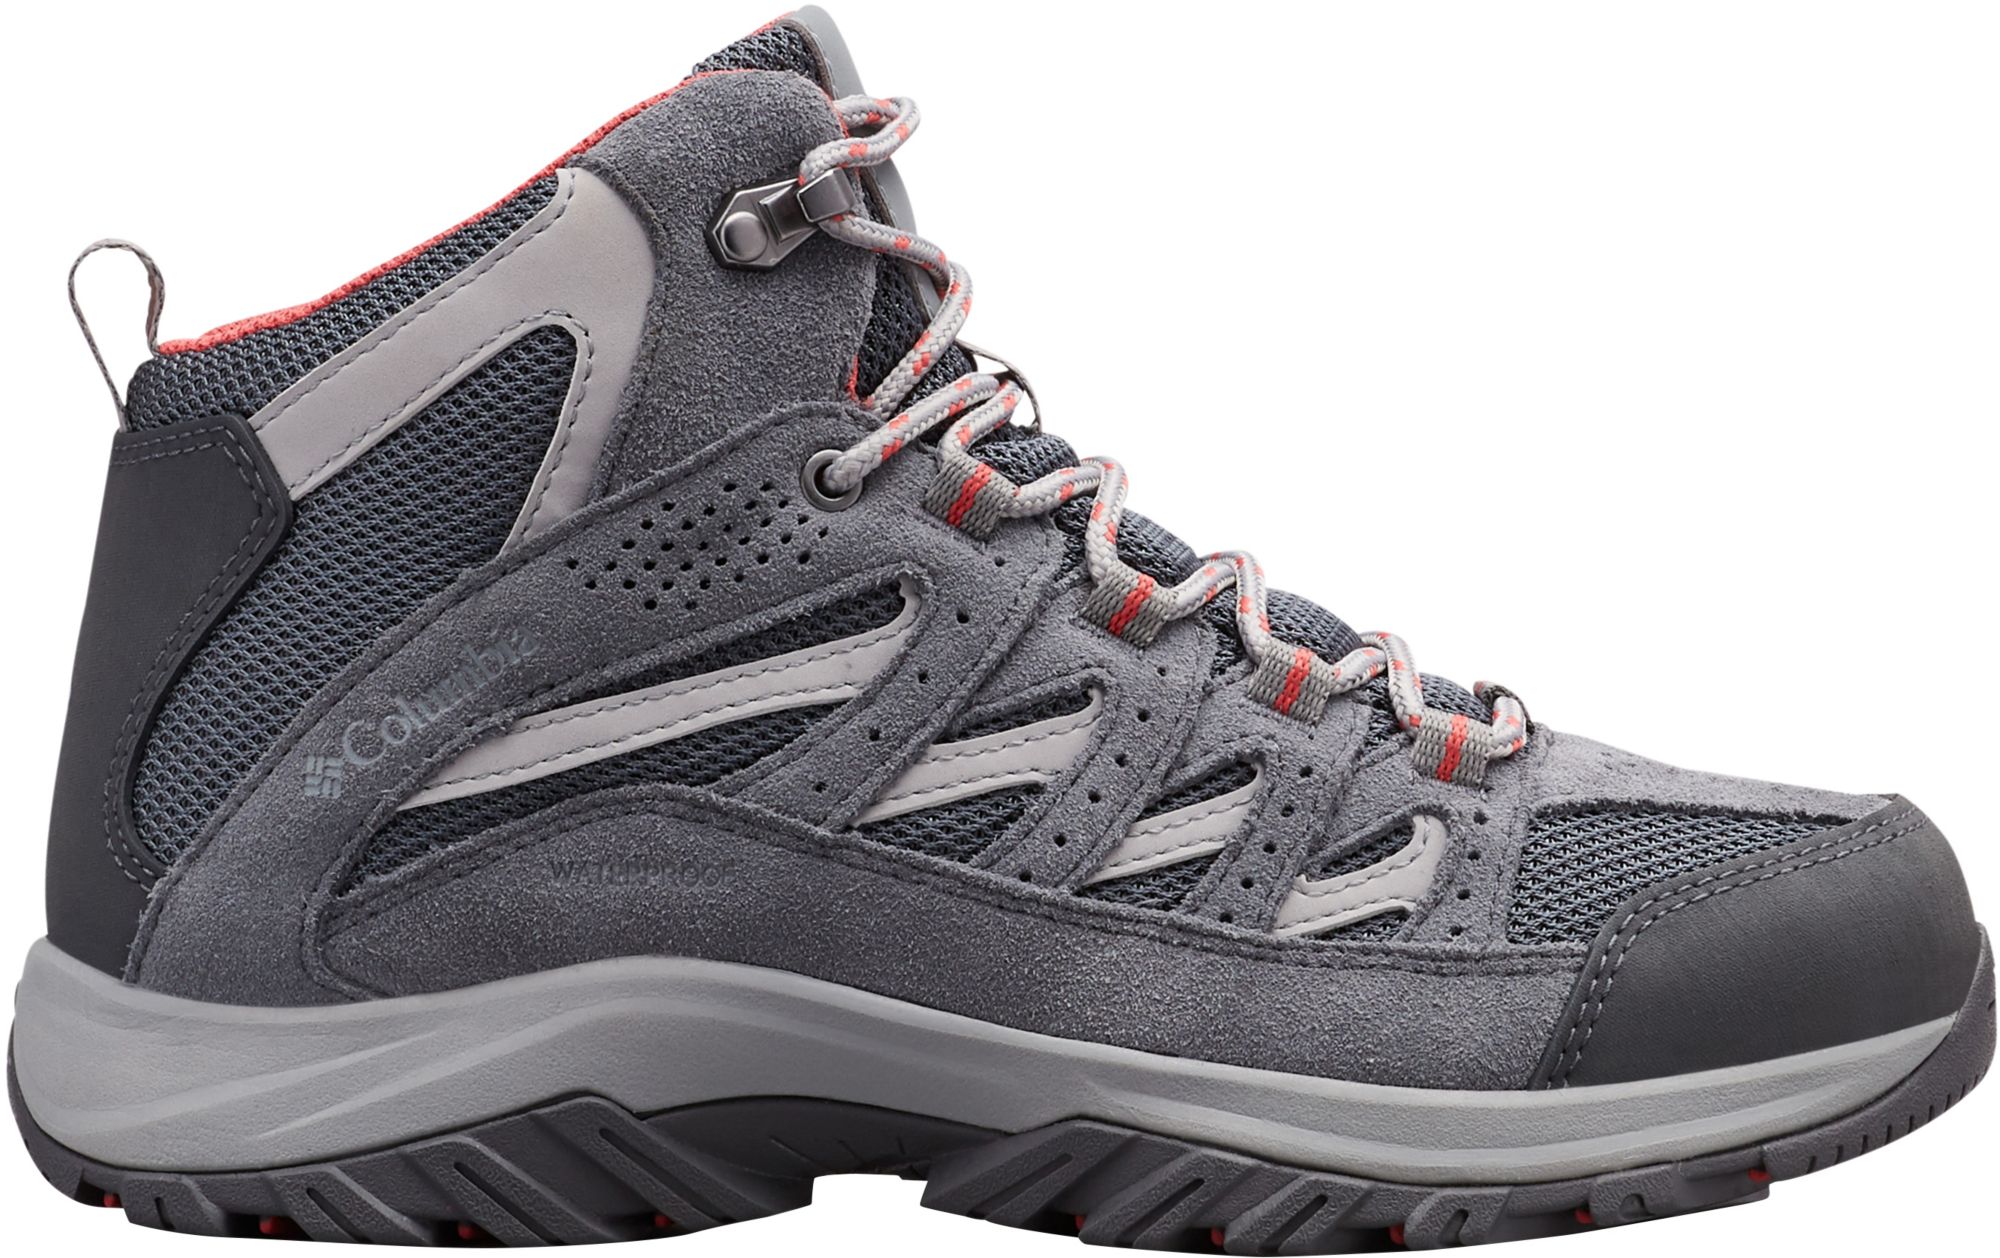 Photos - Trekking Shoes Columbia Women's Crestwood Mid Waterproof Hiking Boots, Size 8.5, Graphite 